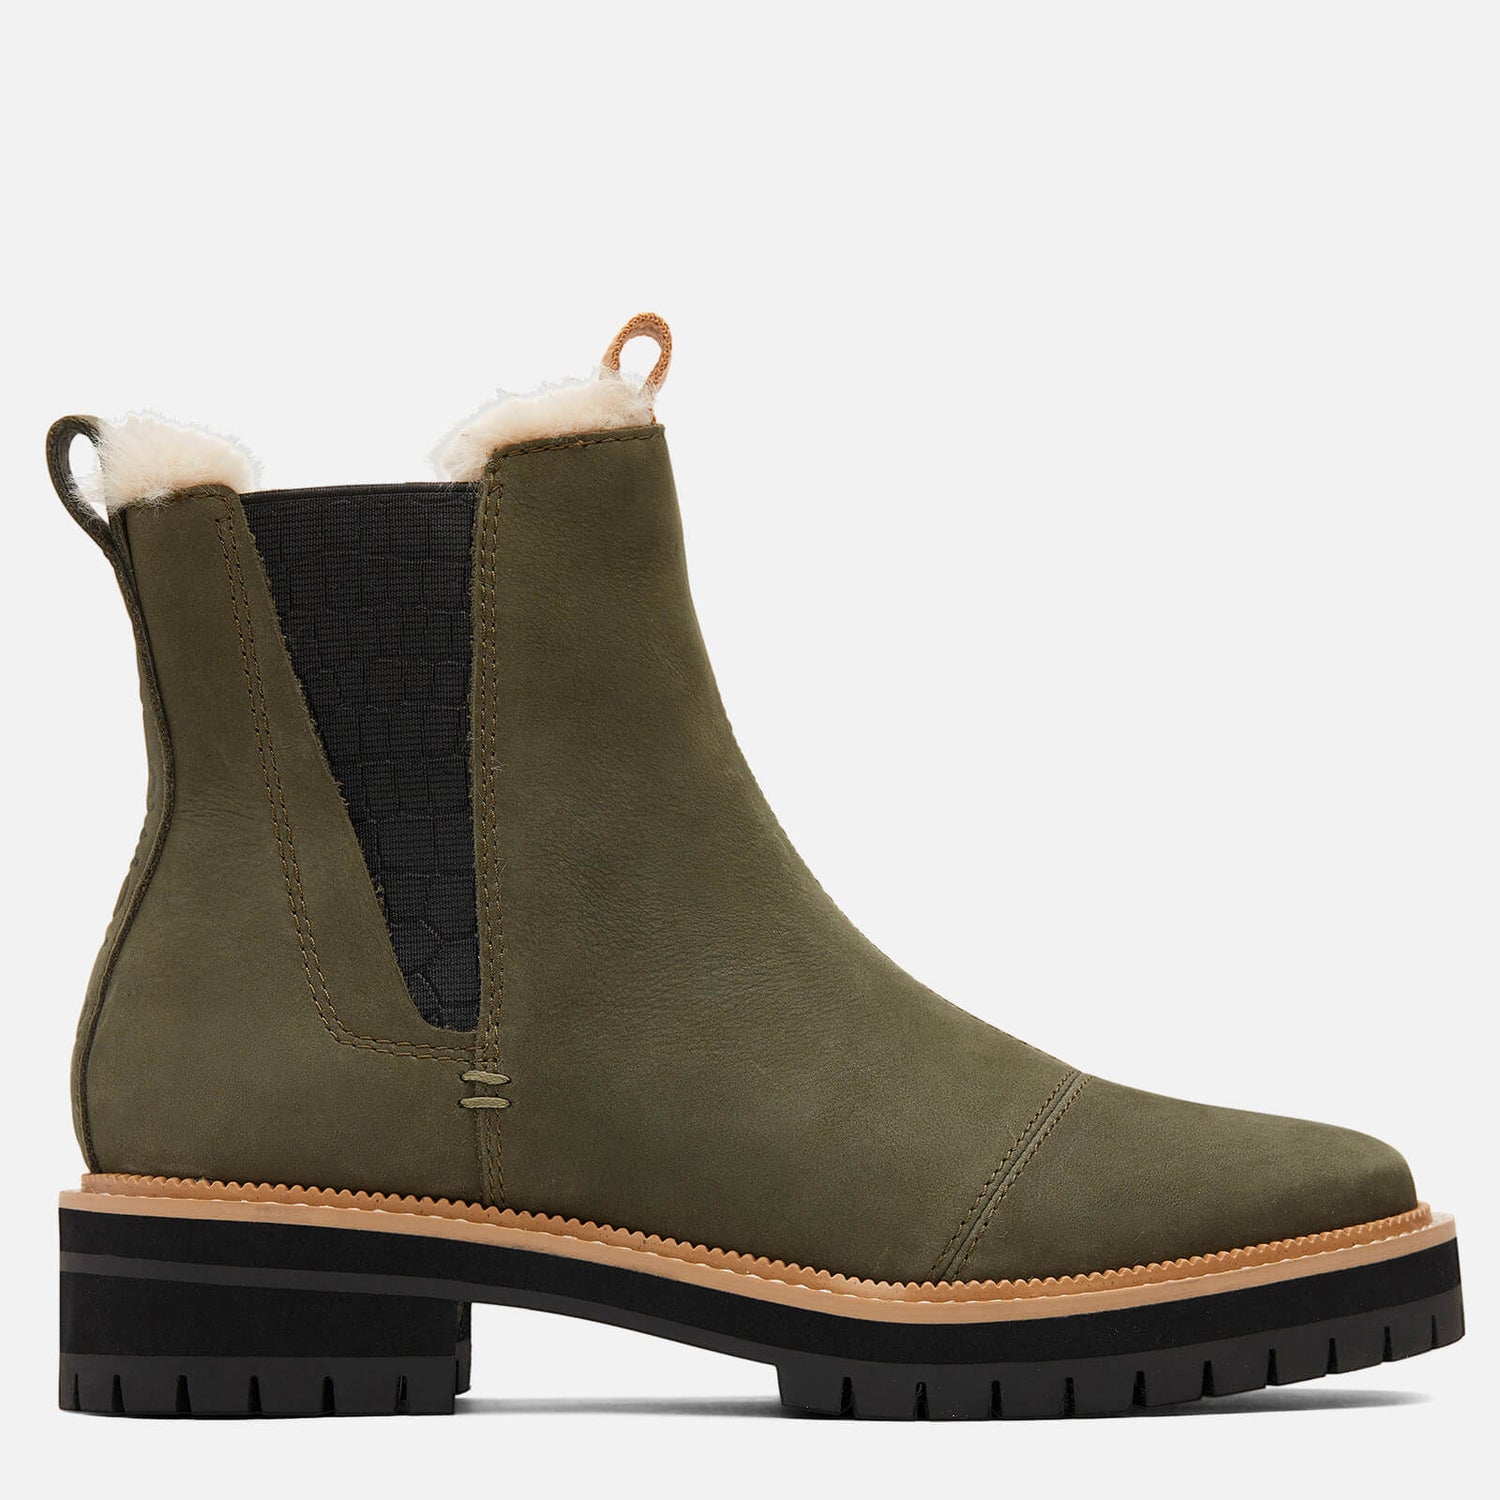 TOMS Women's Dakota Water Resistant Leather Chelsea Boots - Olive